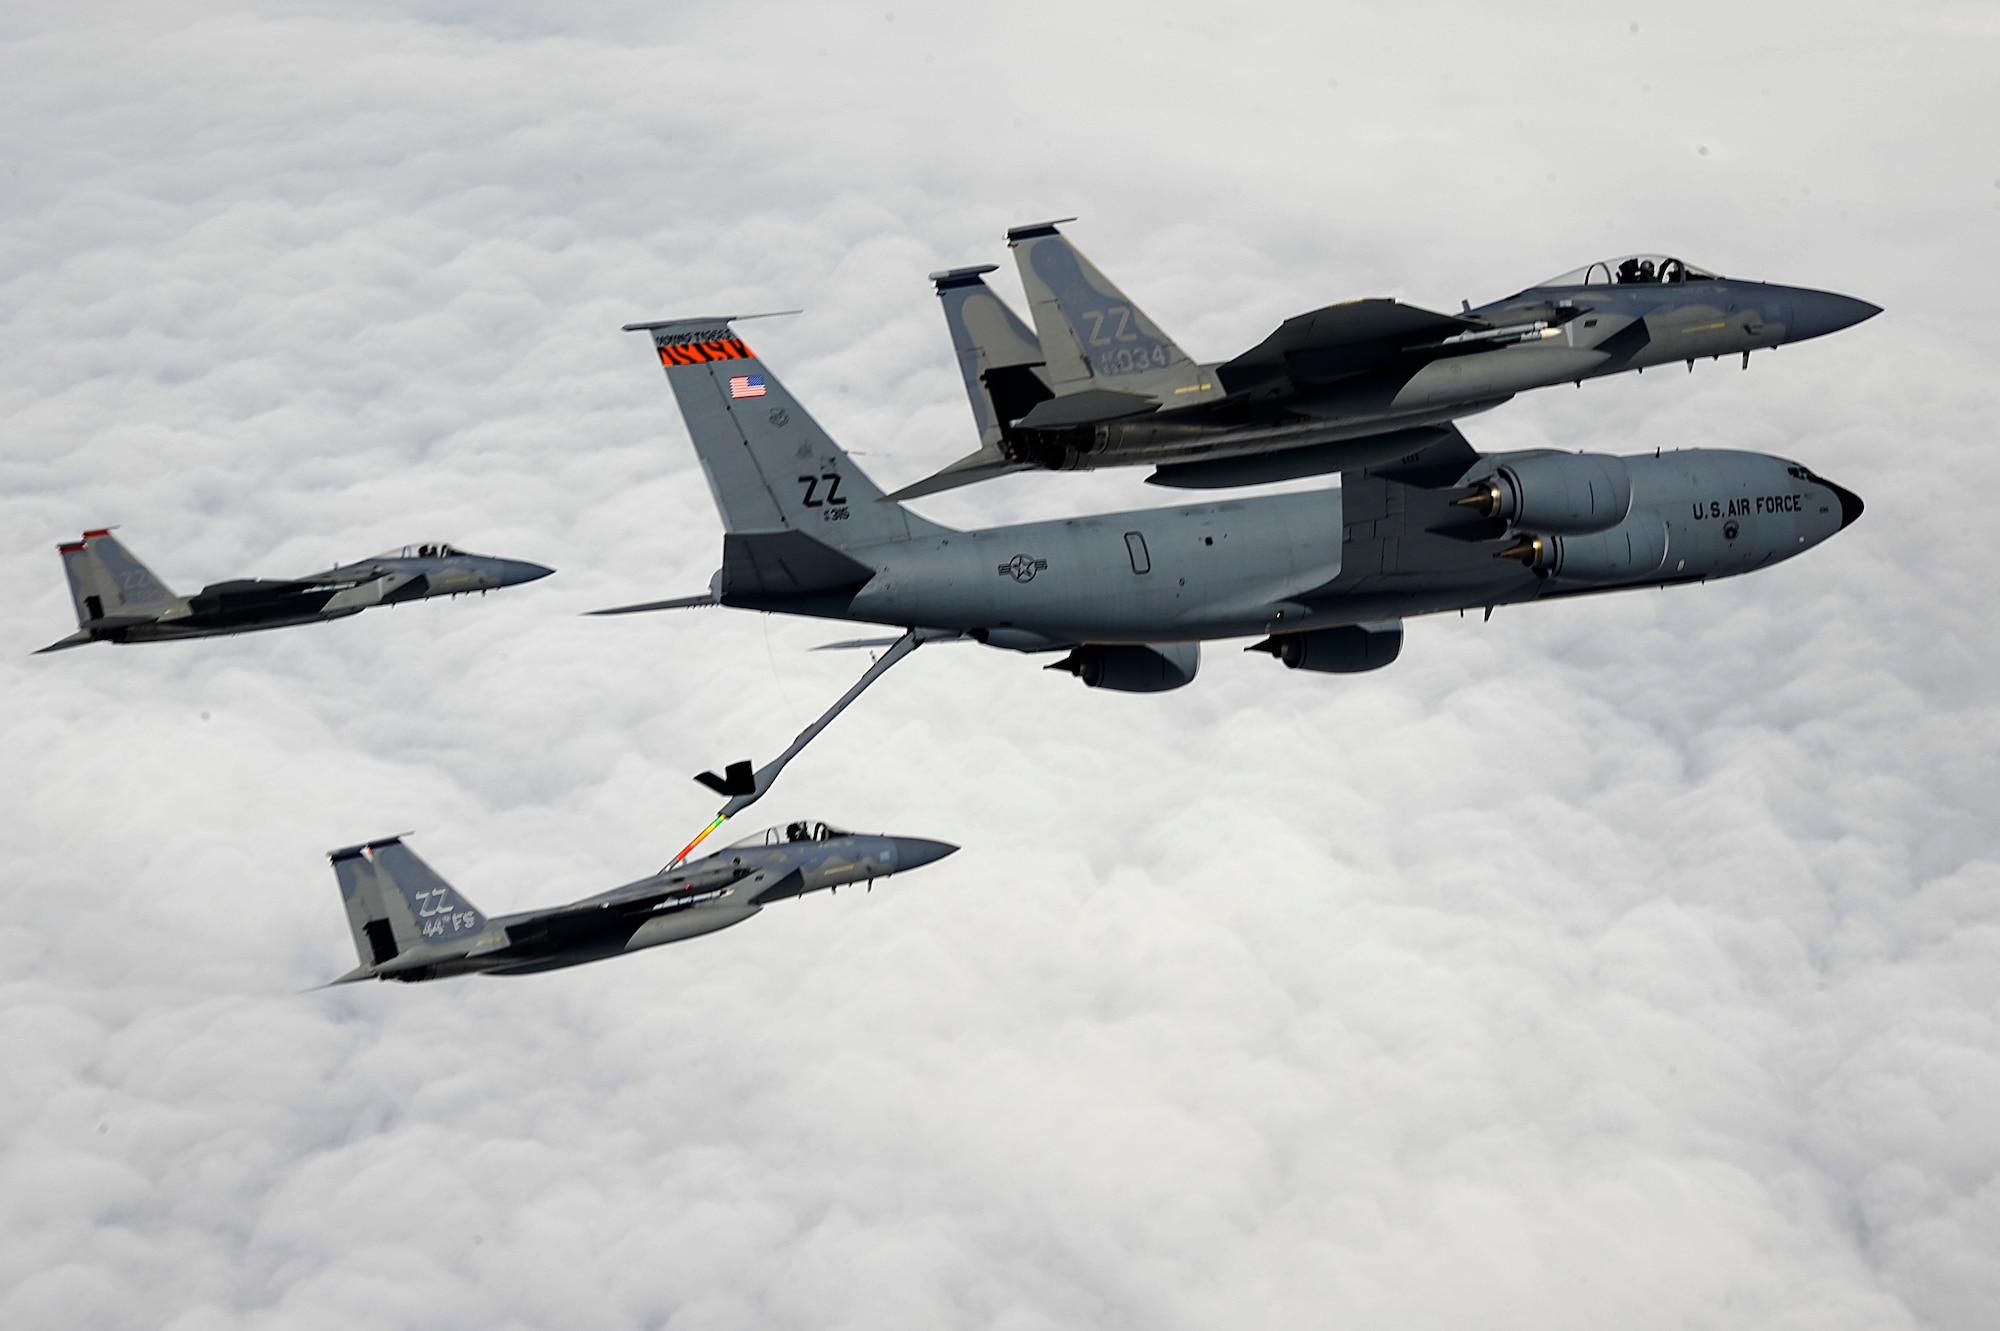 An U.S. Air Force KC-135 Stratotanker aerial refueling aircraft from the 909th Air Refueling Squadron refuels a 44th Fighter Squadron F-15 Eagle while two other F-15s fly in formation during a training mission over Okinawa, Japan, April 5, 2013. The KC-135 and F-15 are two of five aircraft regularly operated from Kadena Air Base. (U.S. Air Force photo/Senior Airman Maeson L. Elleman)